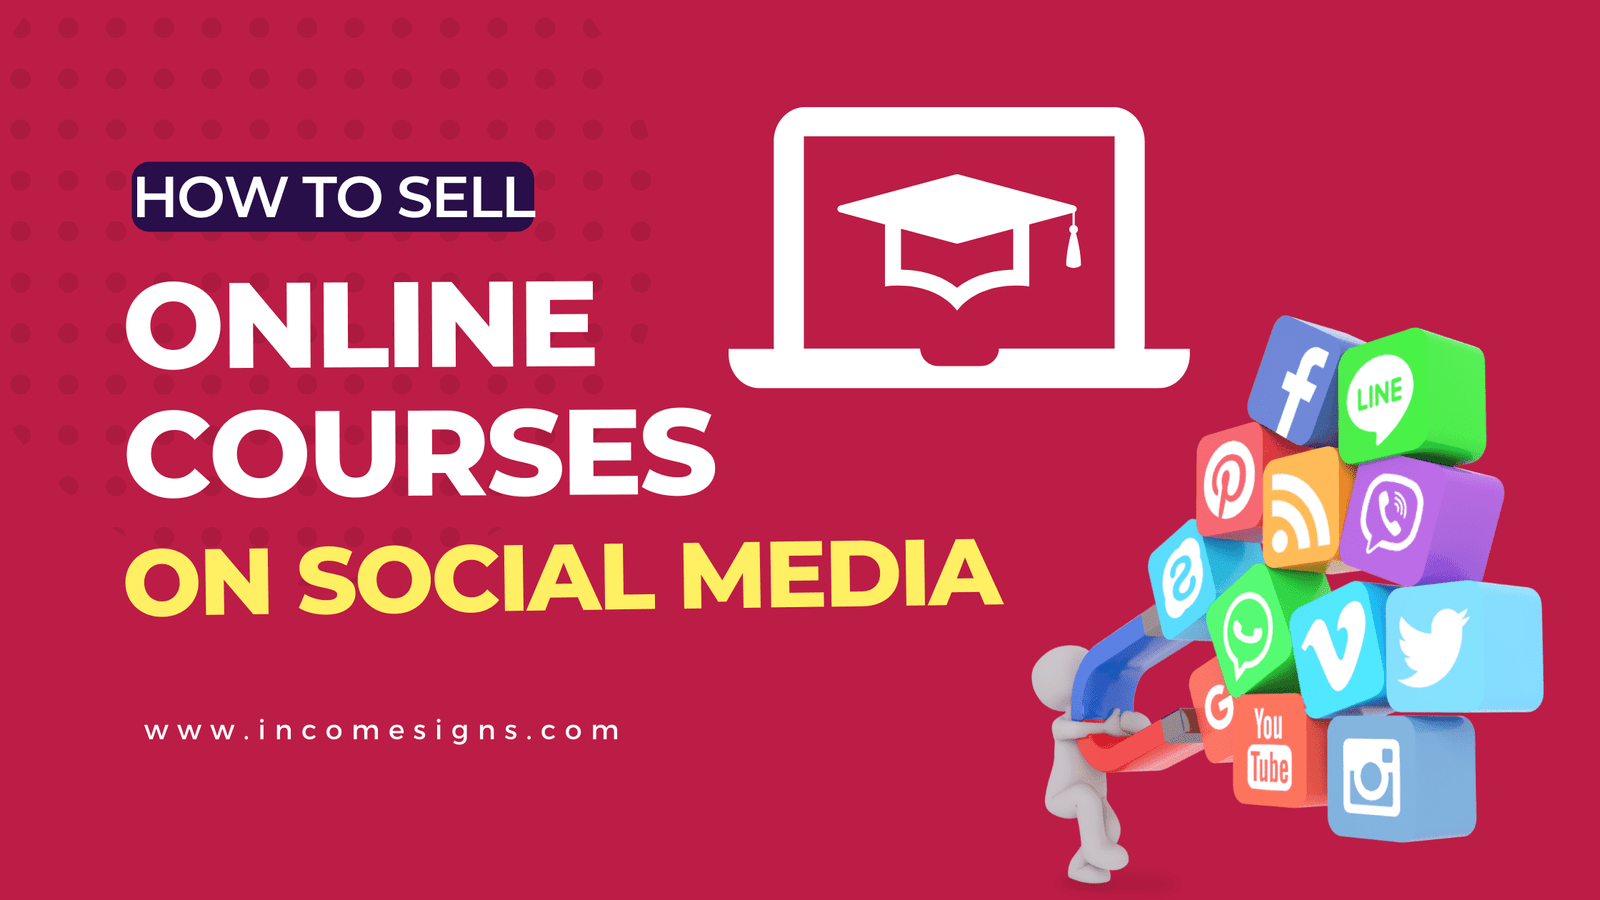 How to Sell Online Courses on Social Media - Income Signs